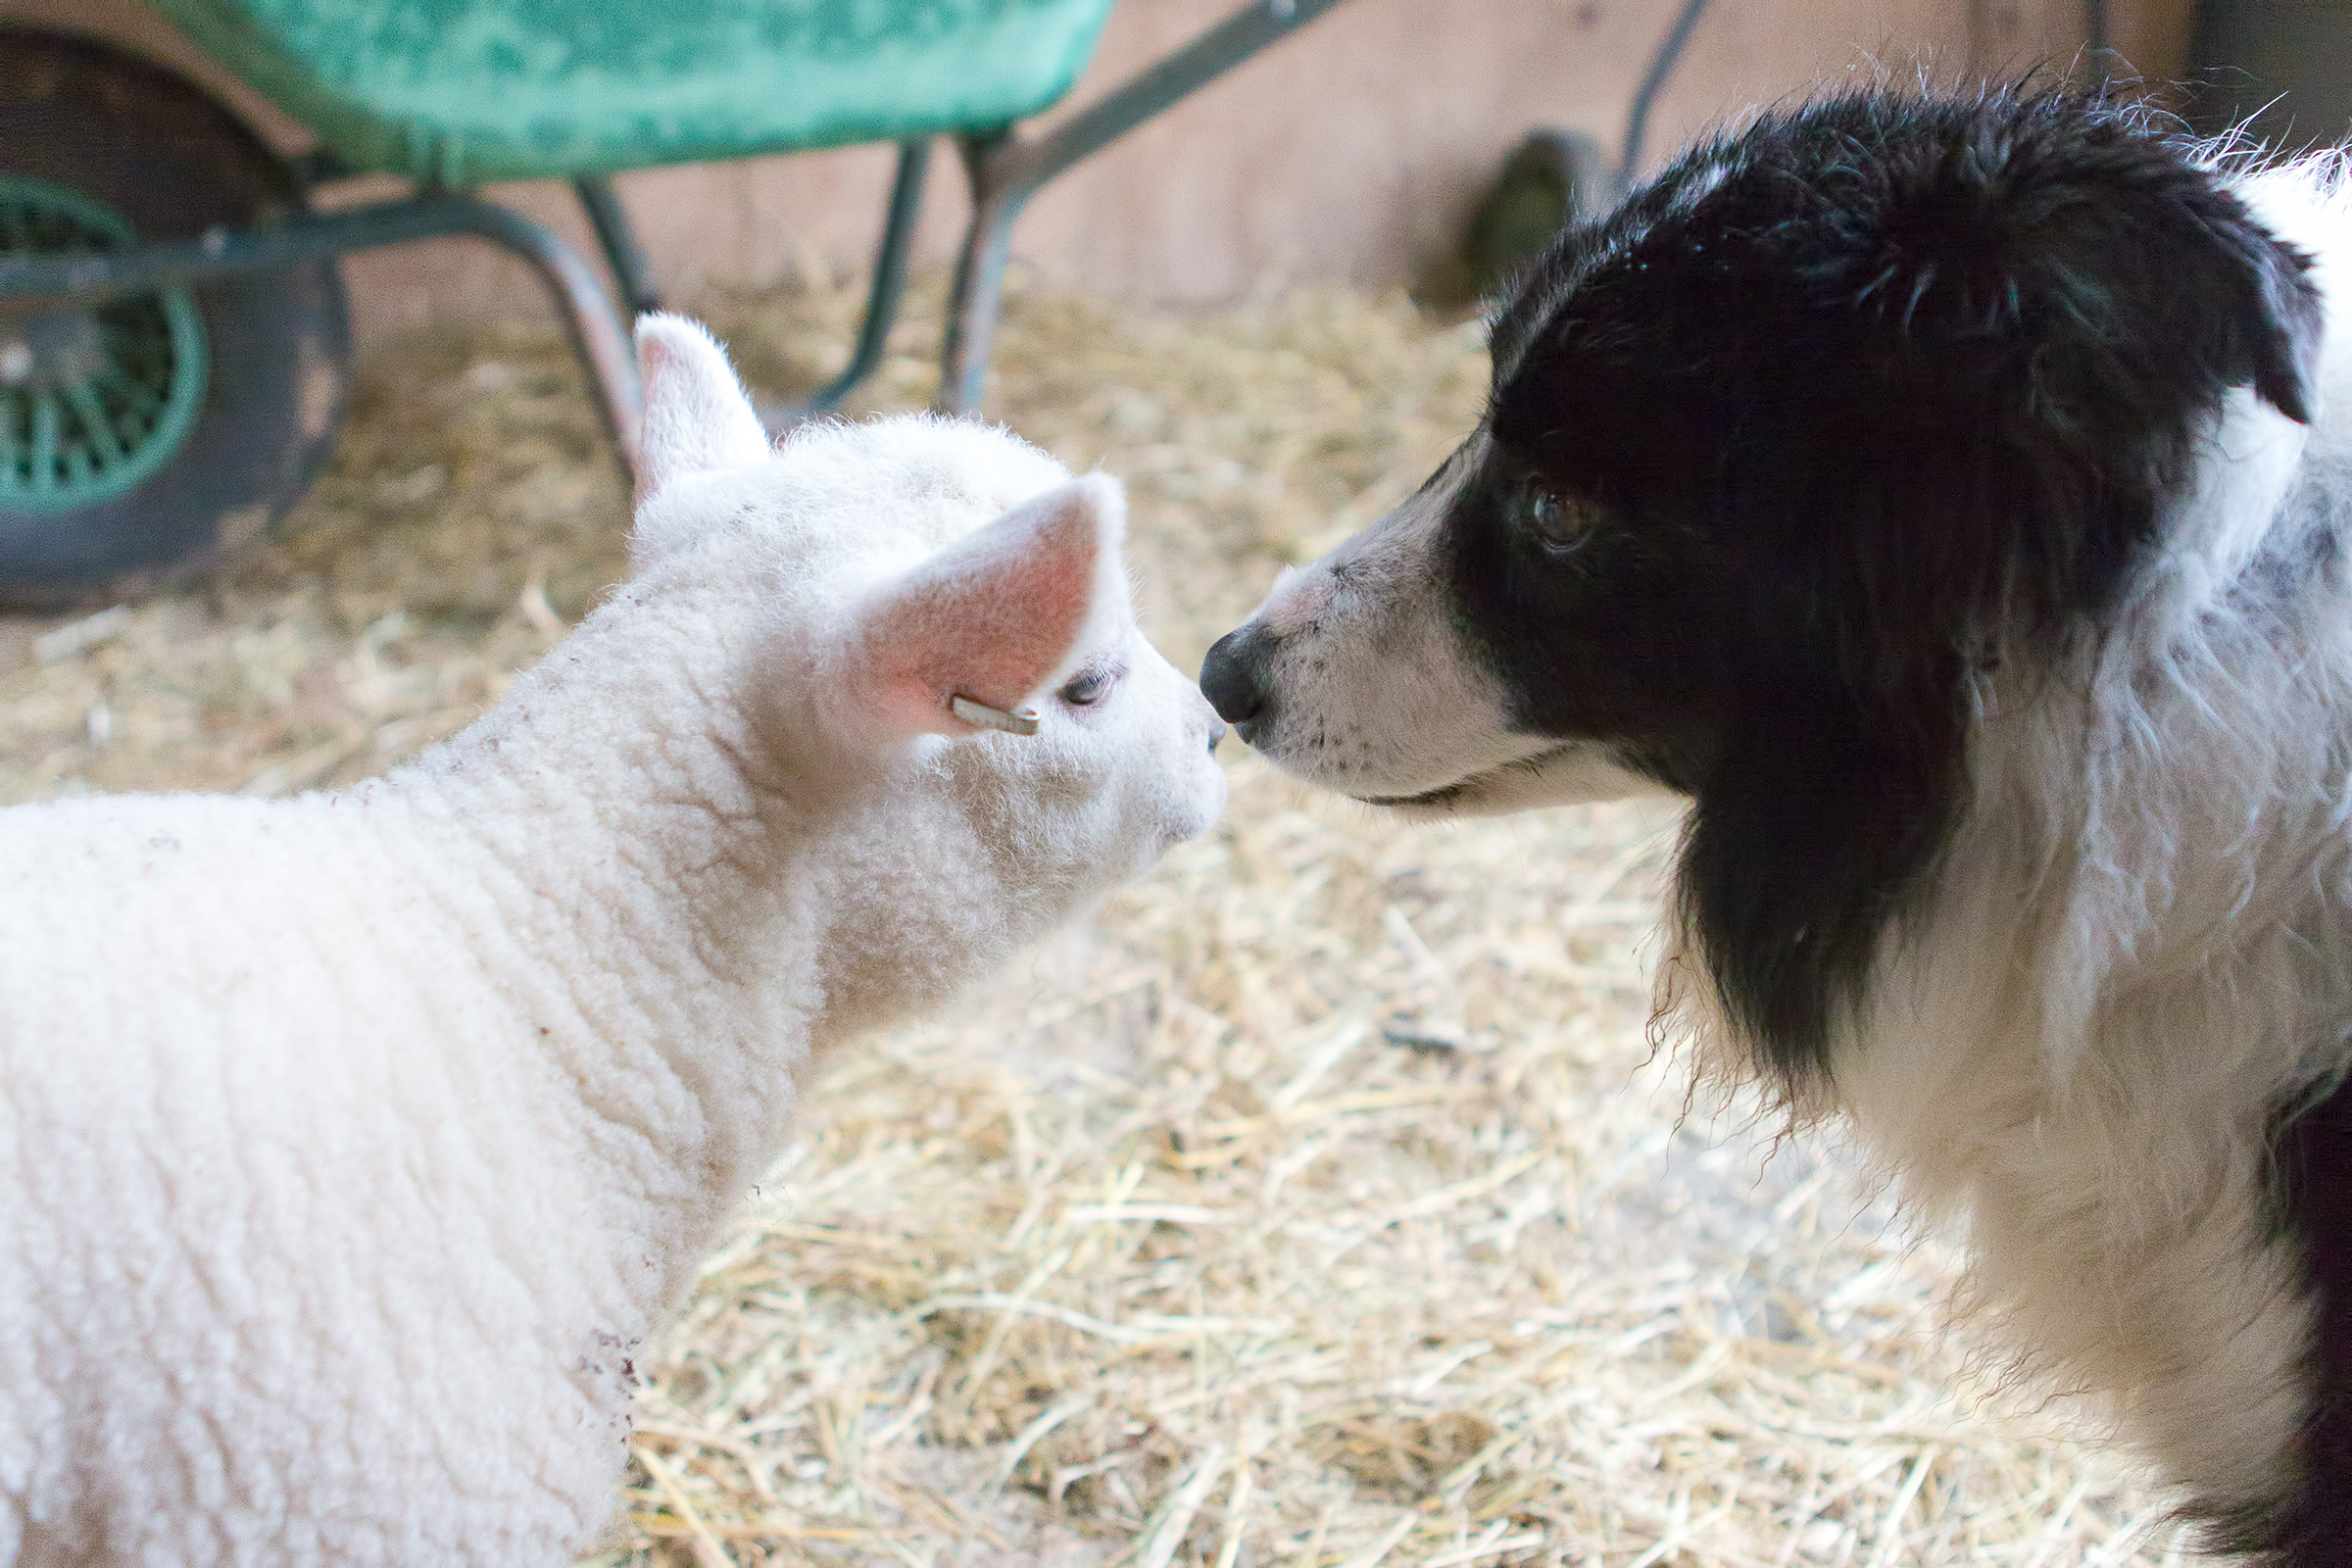 Sheep and dog, Affectionate, New, Look, Love, HQ Photo